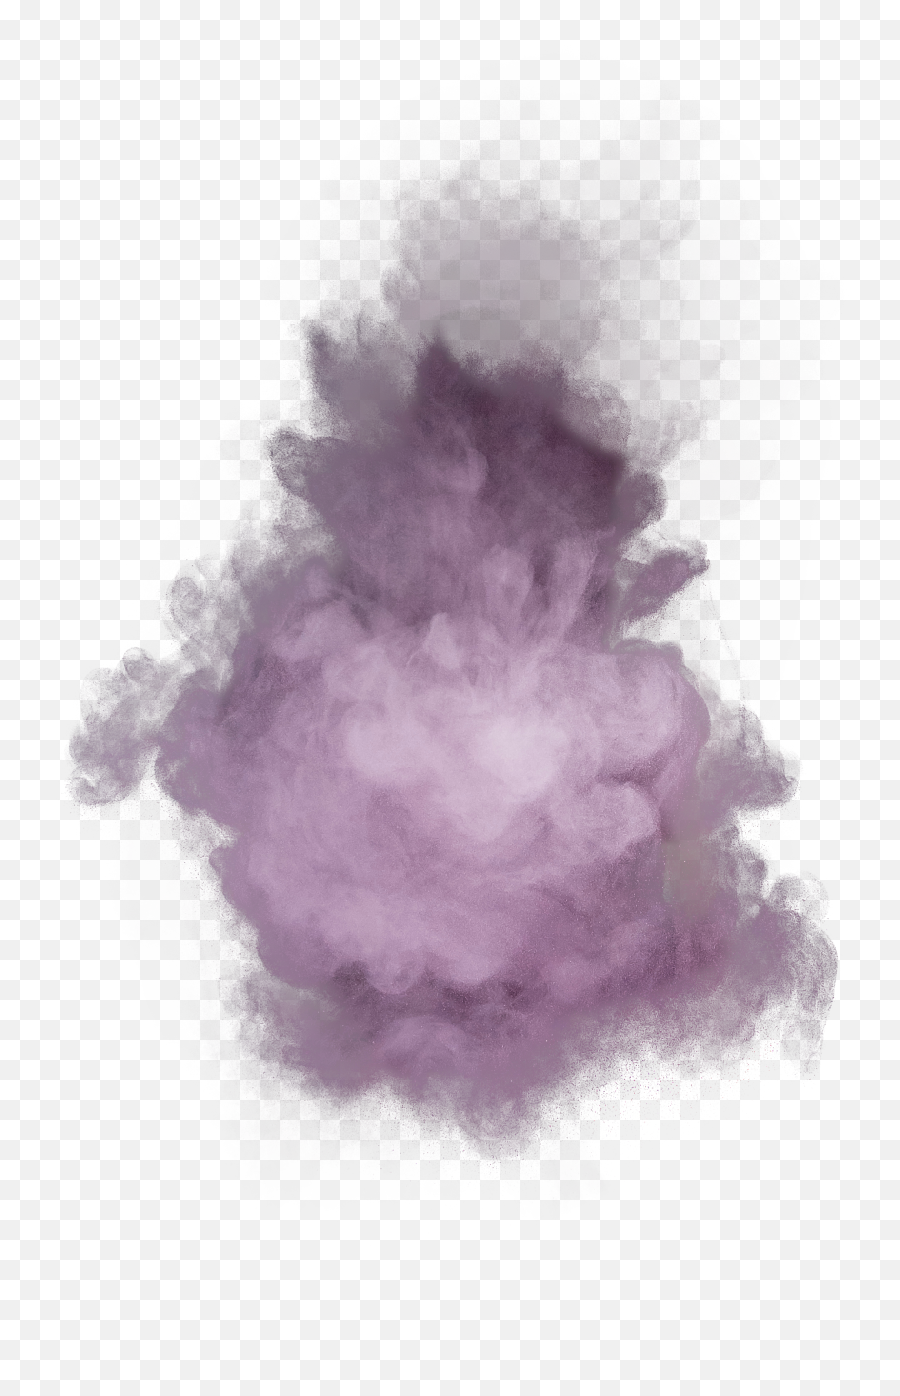 Purple Powder Explosive Material Png Image Birthday - Purple Powder Explosion Transparent Background,Lilac Png